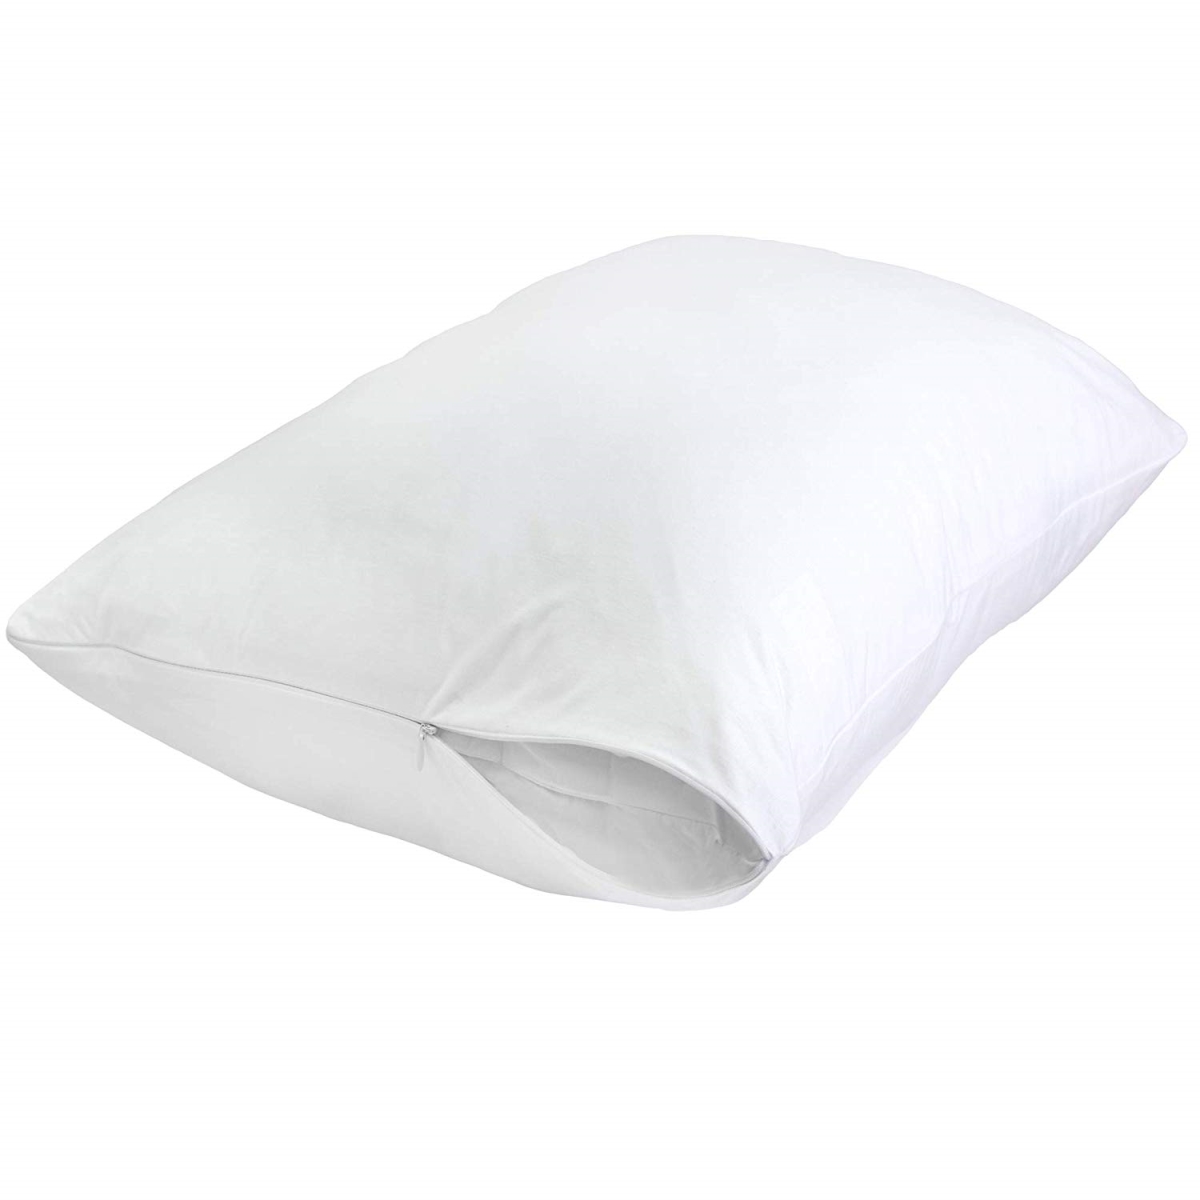 733366 Sleep Solutions By Waterproof Hypoallergenic Bamboo Pillow Protector, White - Queen Size